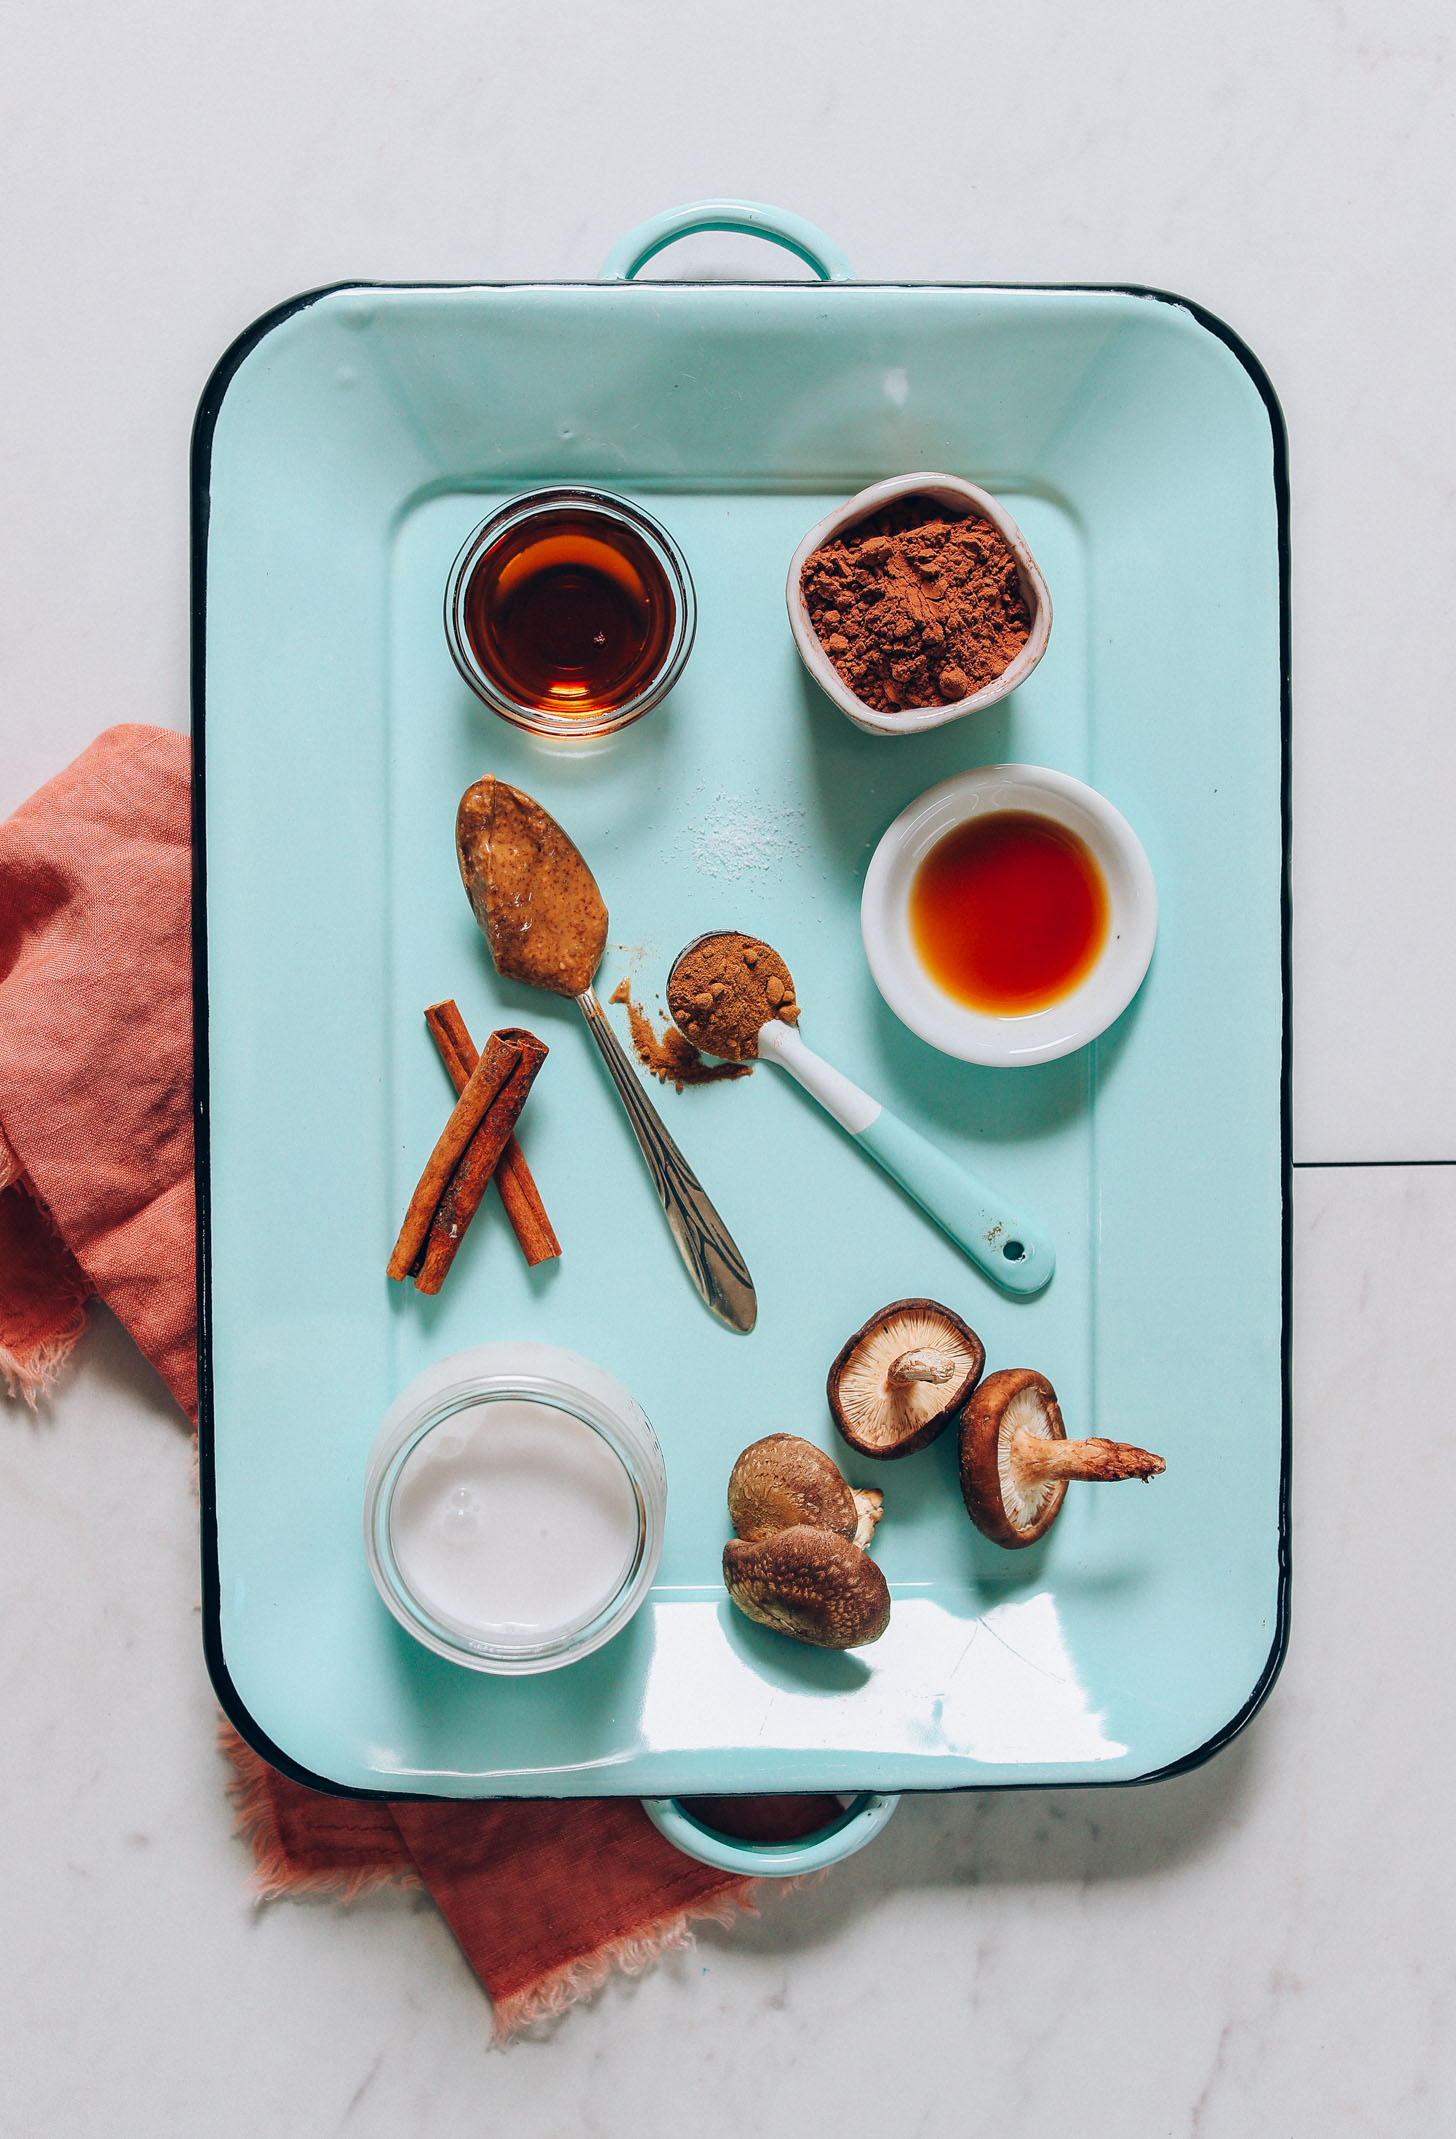 Overhead image of blue tray holding ingredients for mushroom hot cacao latte including mushroom powder, maple syrup, cinnamon, and coconut milk